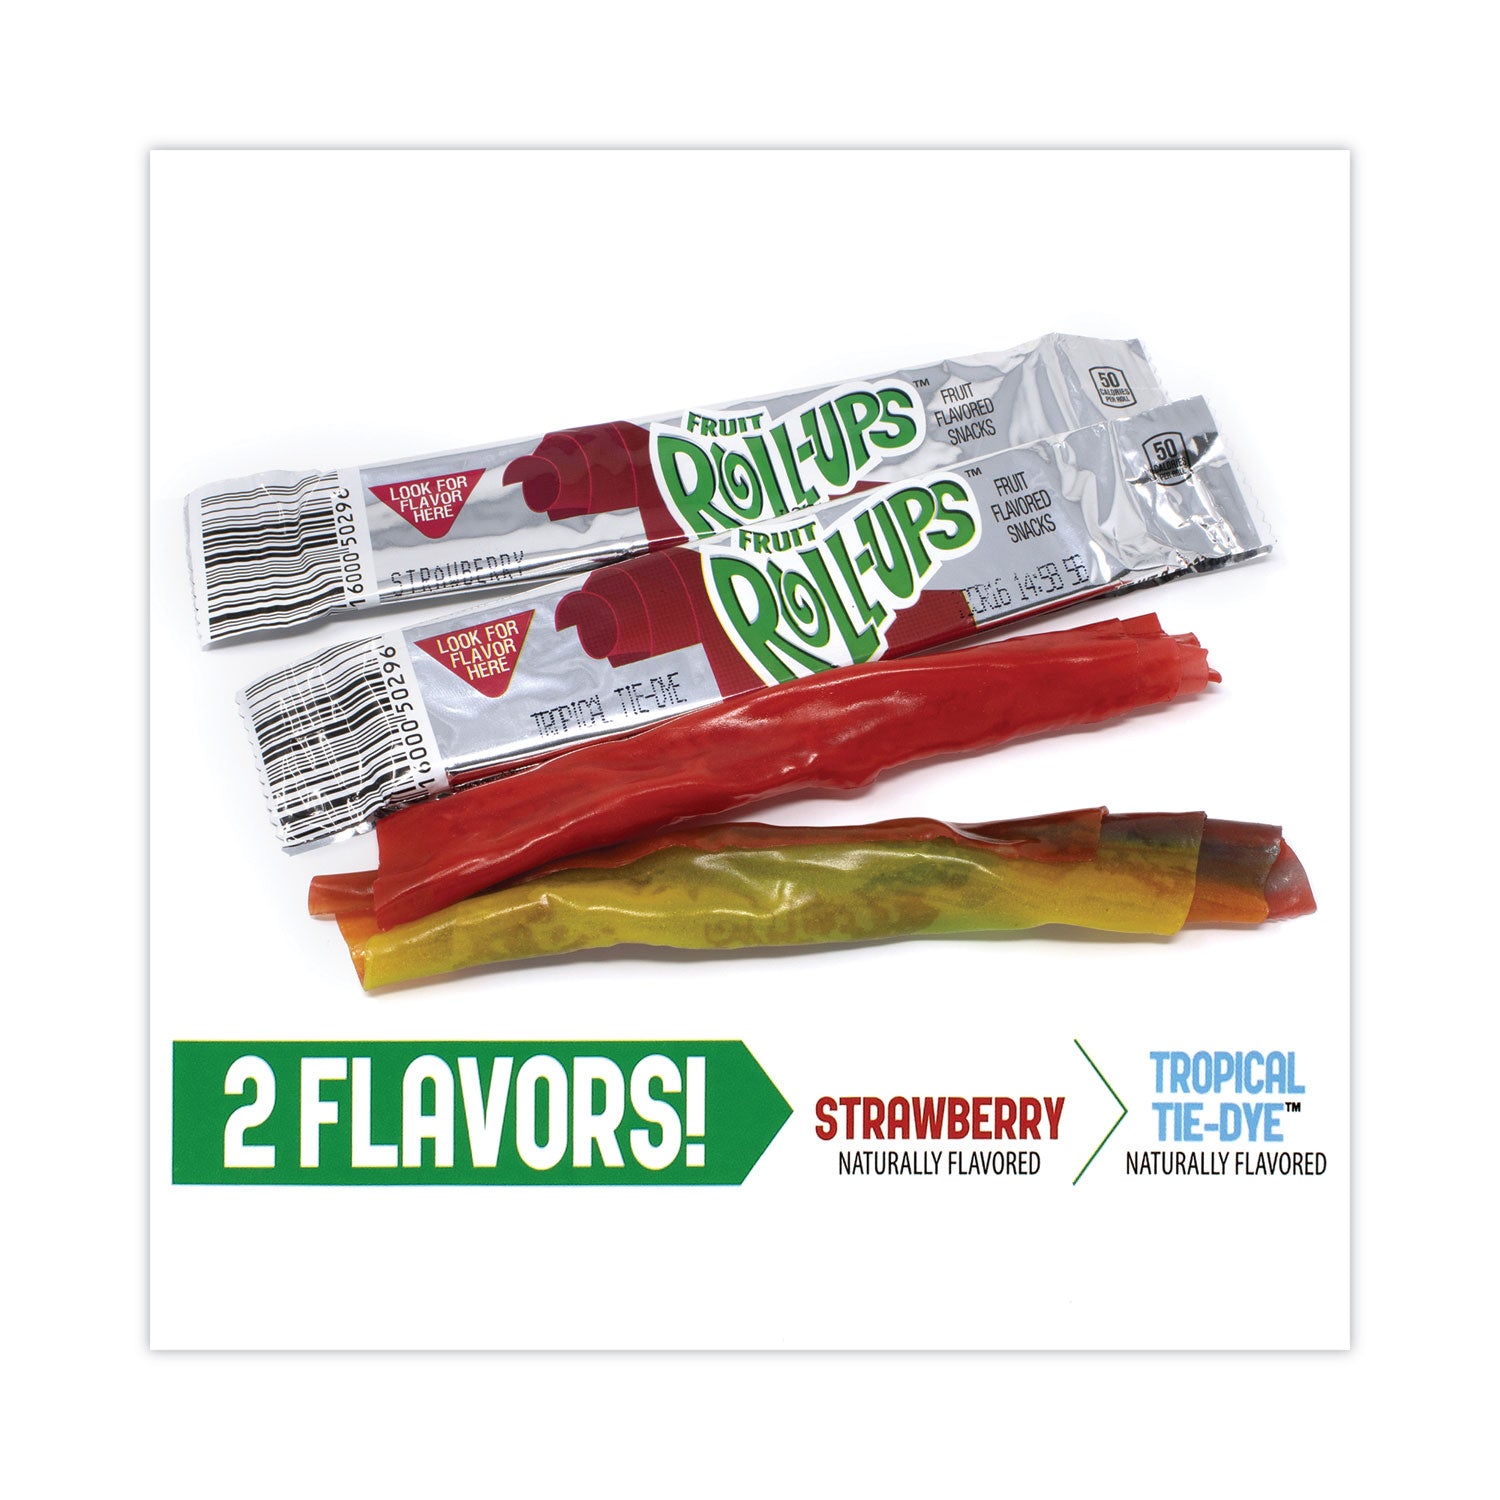 fruit-roll-ups-fruit-snacks-strawberry-and-tropical-tie-dye-flavors-05-oz-72-pouches-carton-ships-in-1-3-business-days_grr22001037 - 2